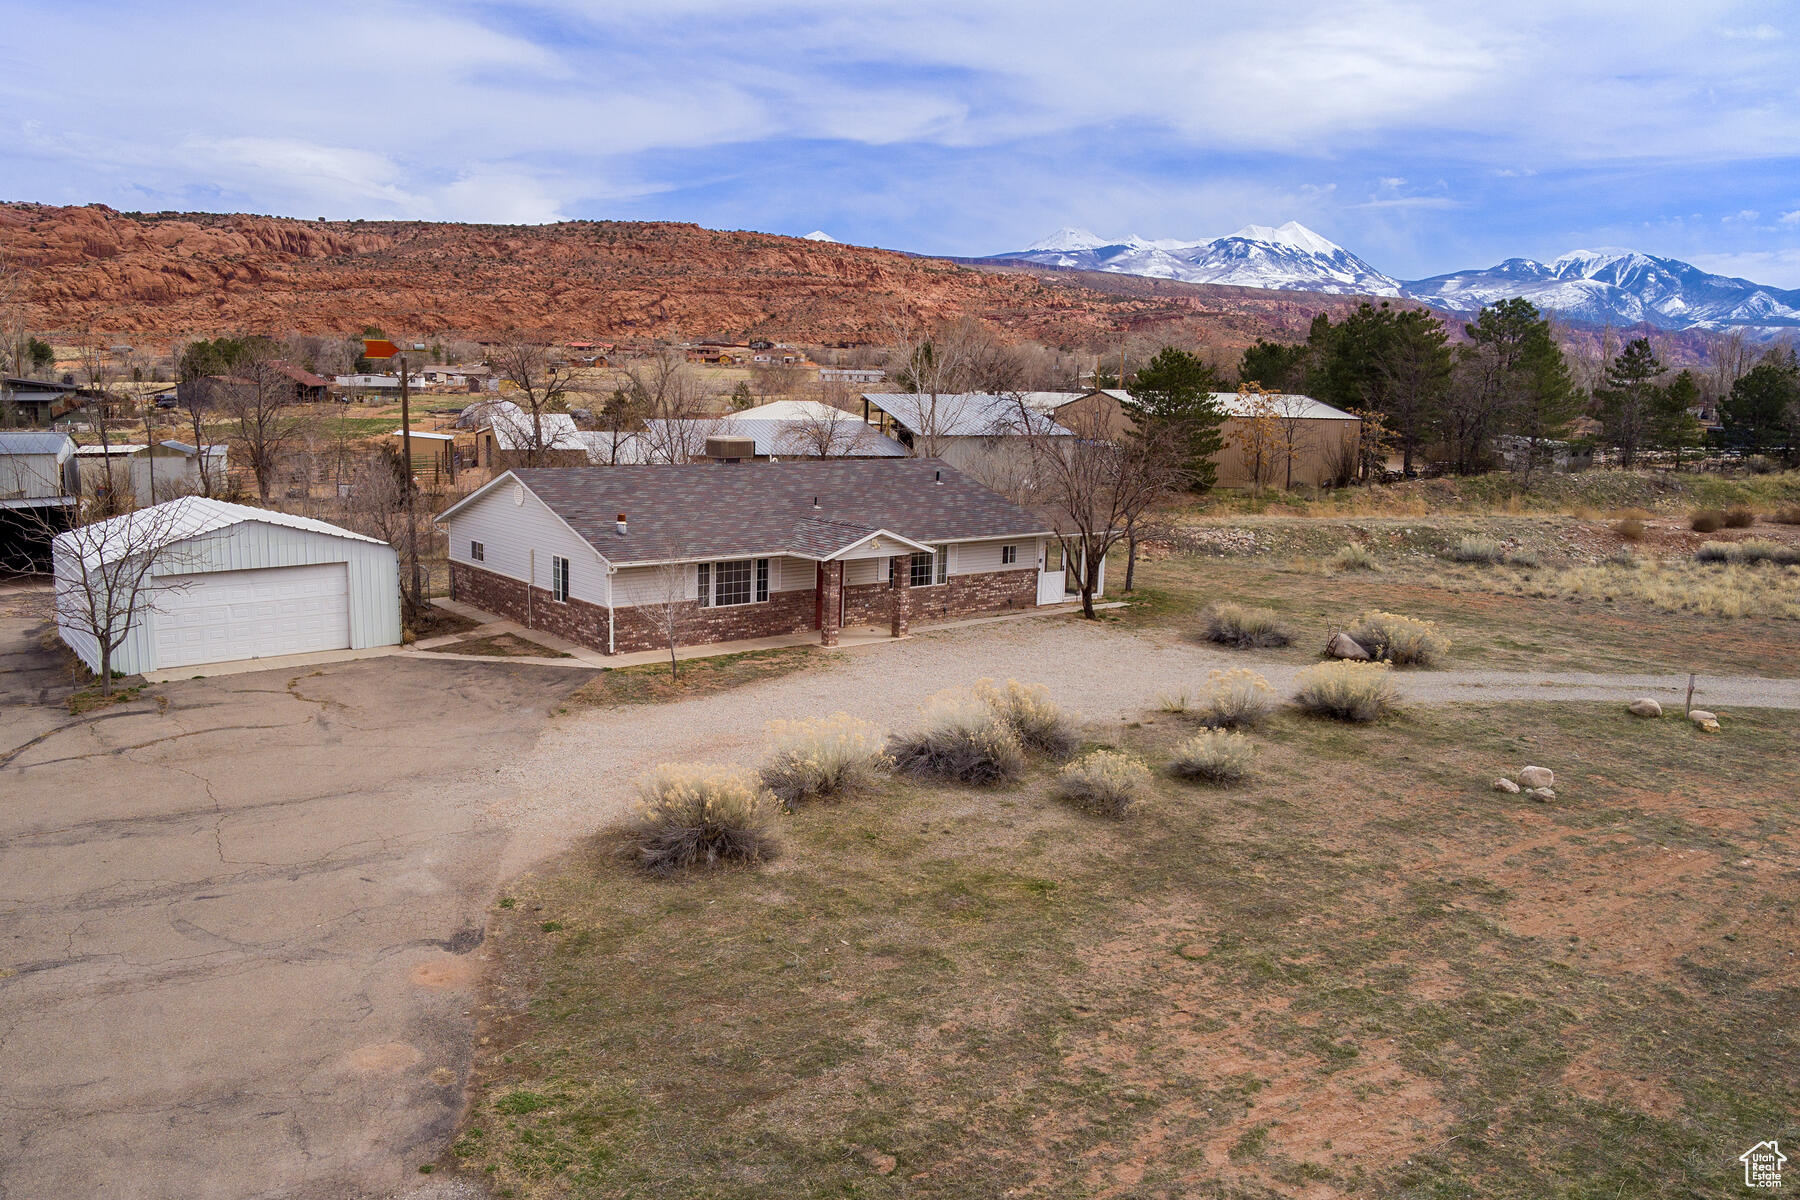 3971 S SPANISH VALLEY, Moab, Utah 84532, 3 Bedrooms Bedrooms, 9 Rooms Rooms,2 BathroomsBathrooms,Residential,For sale,SPANISH VALLEY,1986423